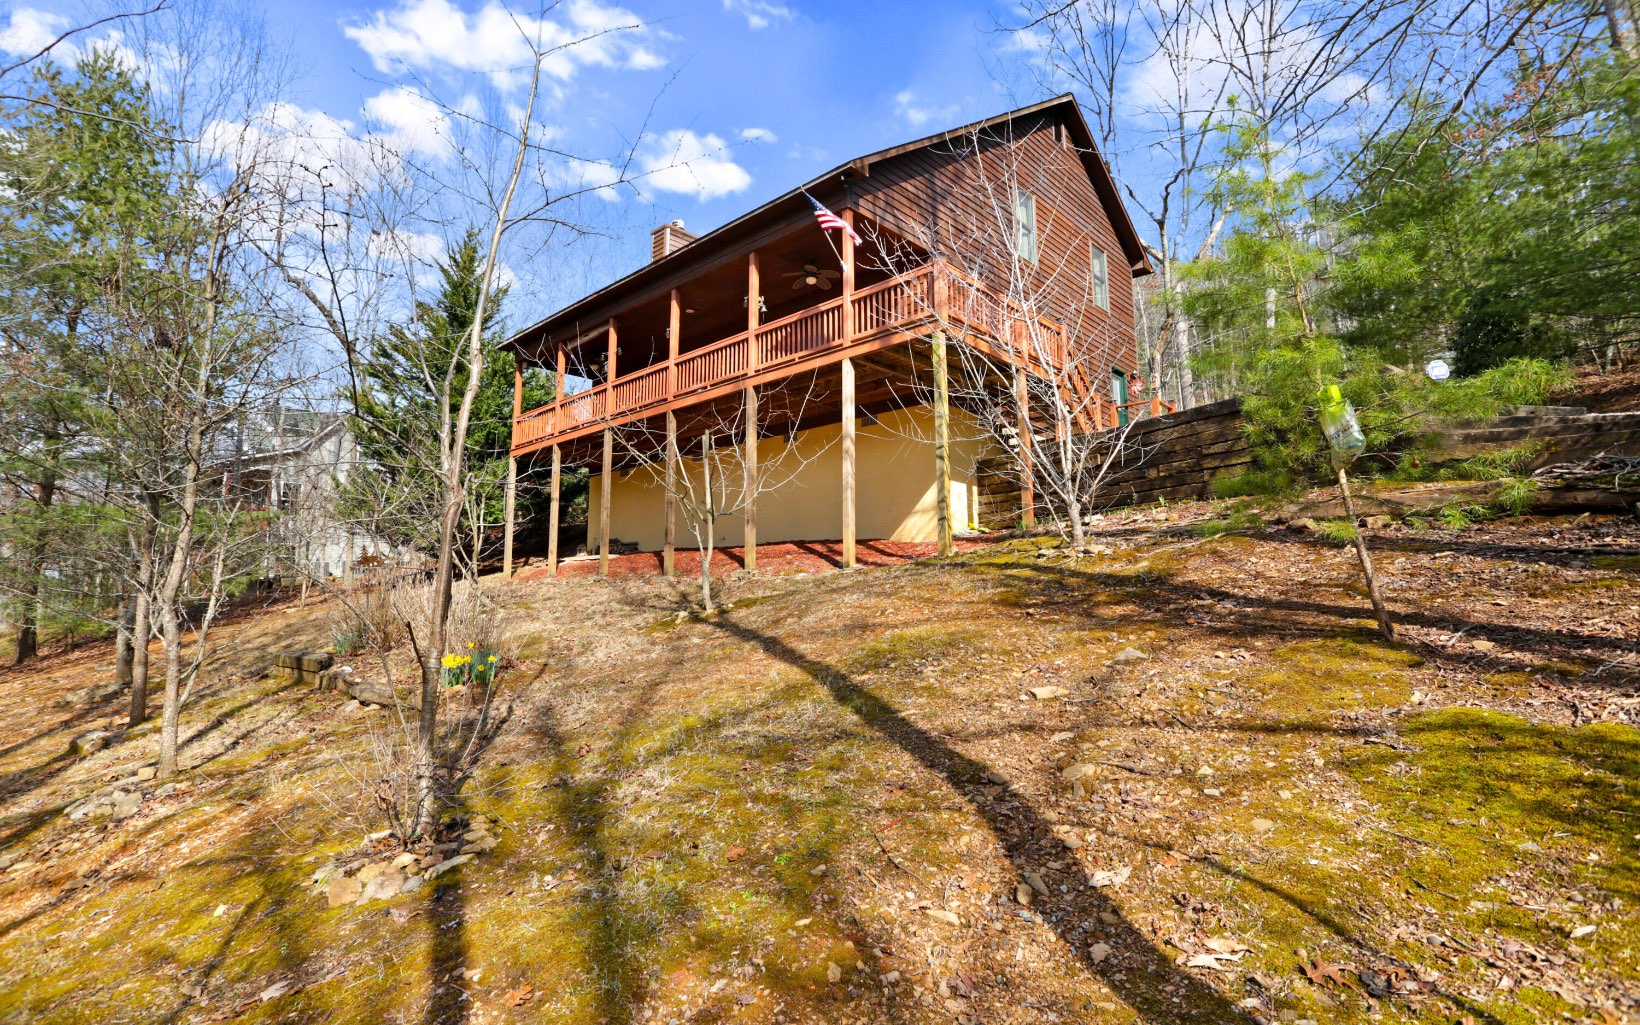 QUALITY BUILT CABIN IN THE NORTH GEORGIA MOUNTAINS!! This home offers an open floor plan, great room with vaulted ceilings & a soaring floor to ceiling stacked stone wood burning fireplace, solid maple cabinets in kitchen and oversized laundry/pantry and baths, beautiful blend of wood & drywall, huge master bedroom, bath with double bowl vanity, separate shower & garden tub & walk-in closet, large covered back deck. Upstairs bedrooms are spacious and have a large Jack & Jill bath with separate vanity & nice upgrades throughout. Unbelievable size bonus room with storage space that would be a great hobby room or office. Lots of storage room in stand-up crawl space. Plus 2 peach trees, 4 apple trees, 2 cherry trees and 2 pear trees.